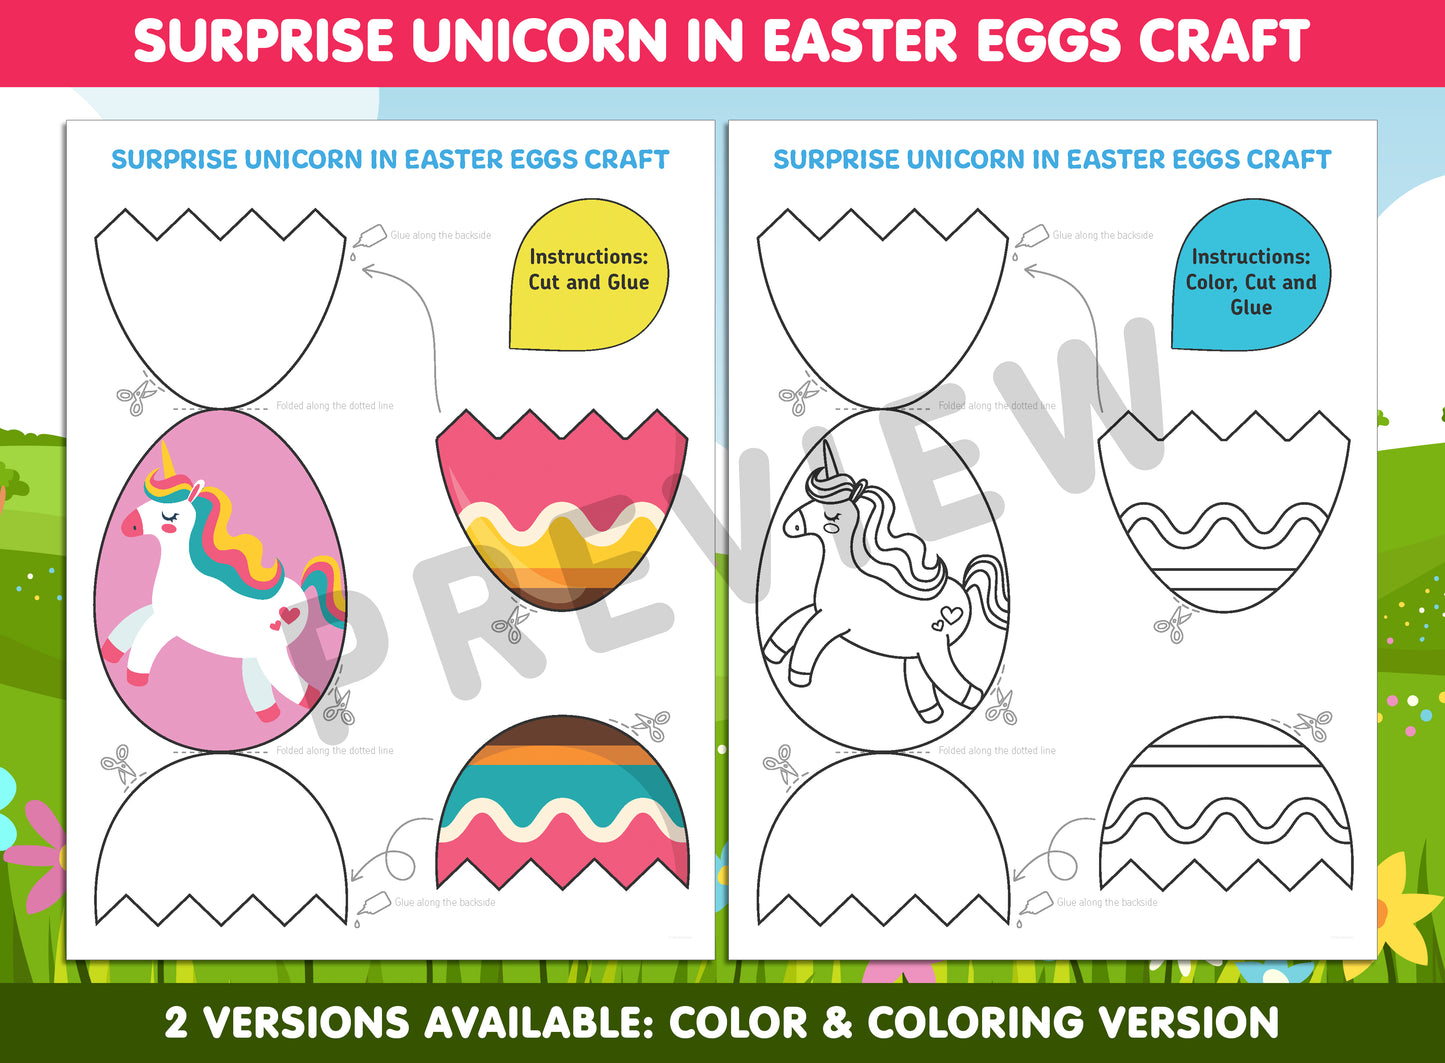 Surprise Unicorn in Easter Eggs Craft, Spring Activity, Color, Cut & Glue, Available in Color and Coloring Versions, Instant PDF Download